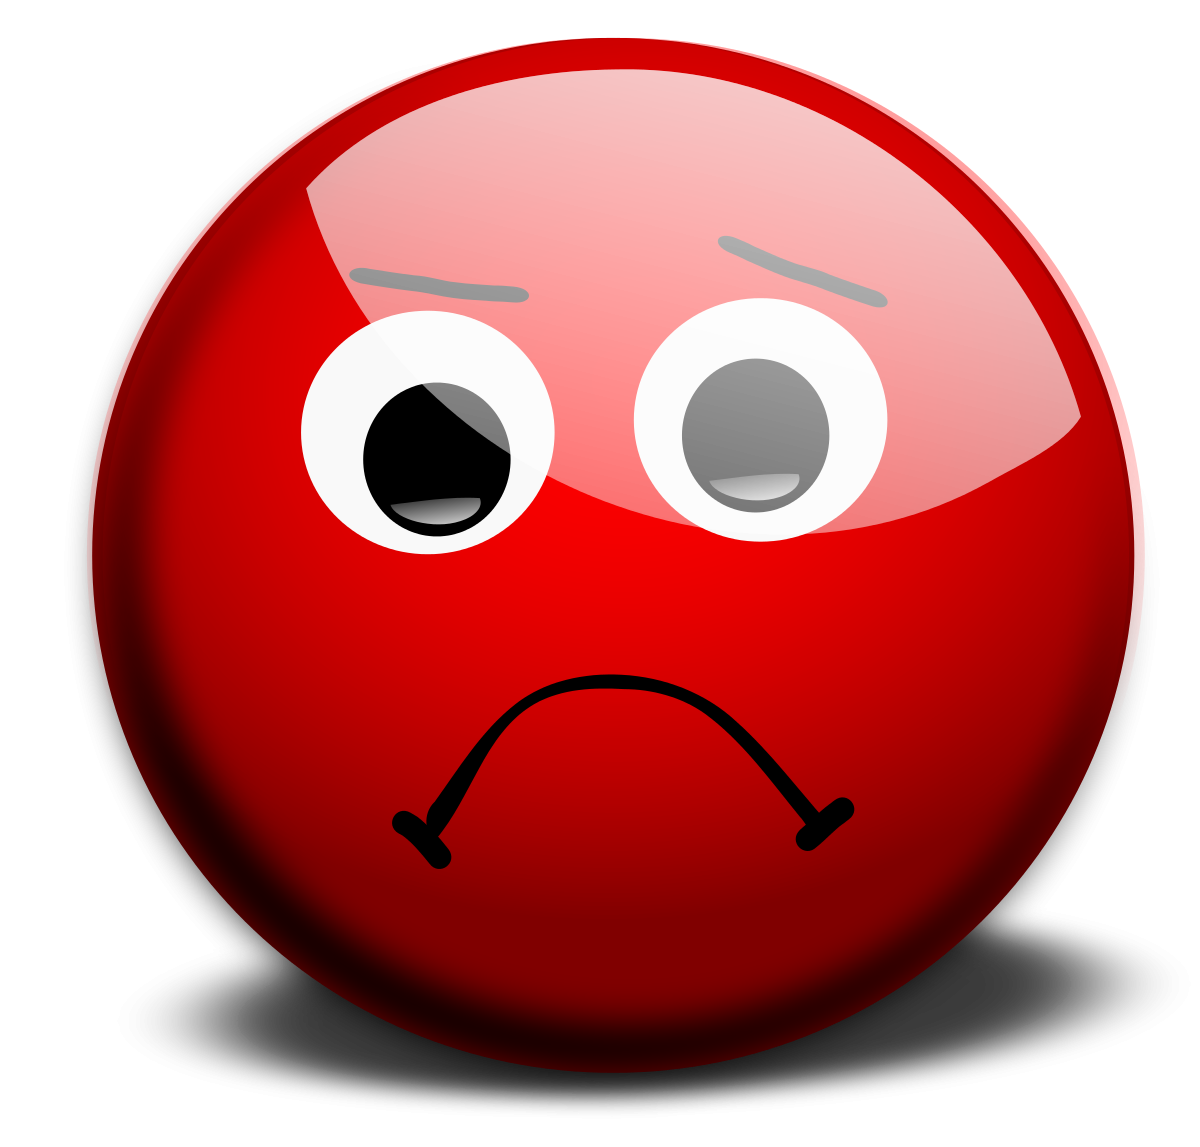 Sad Face Clipart by morkaitehred : Smiley Cliparts #19068- ClipartSE